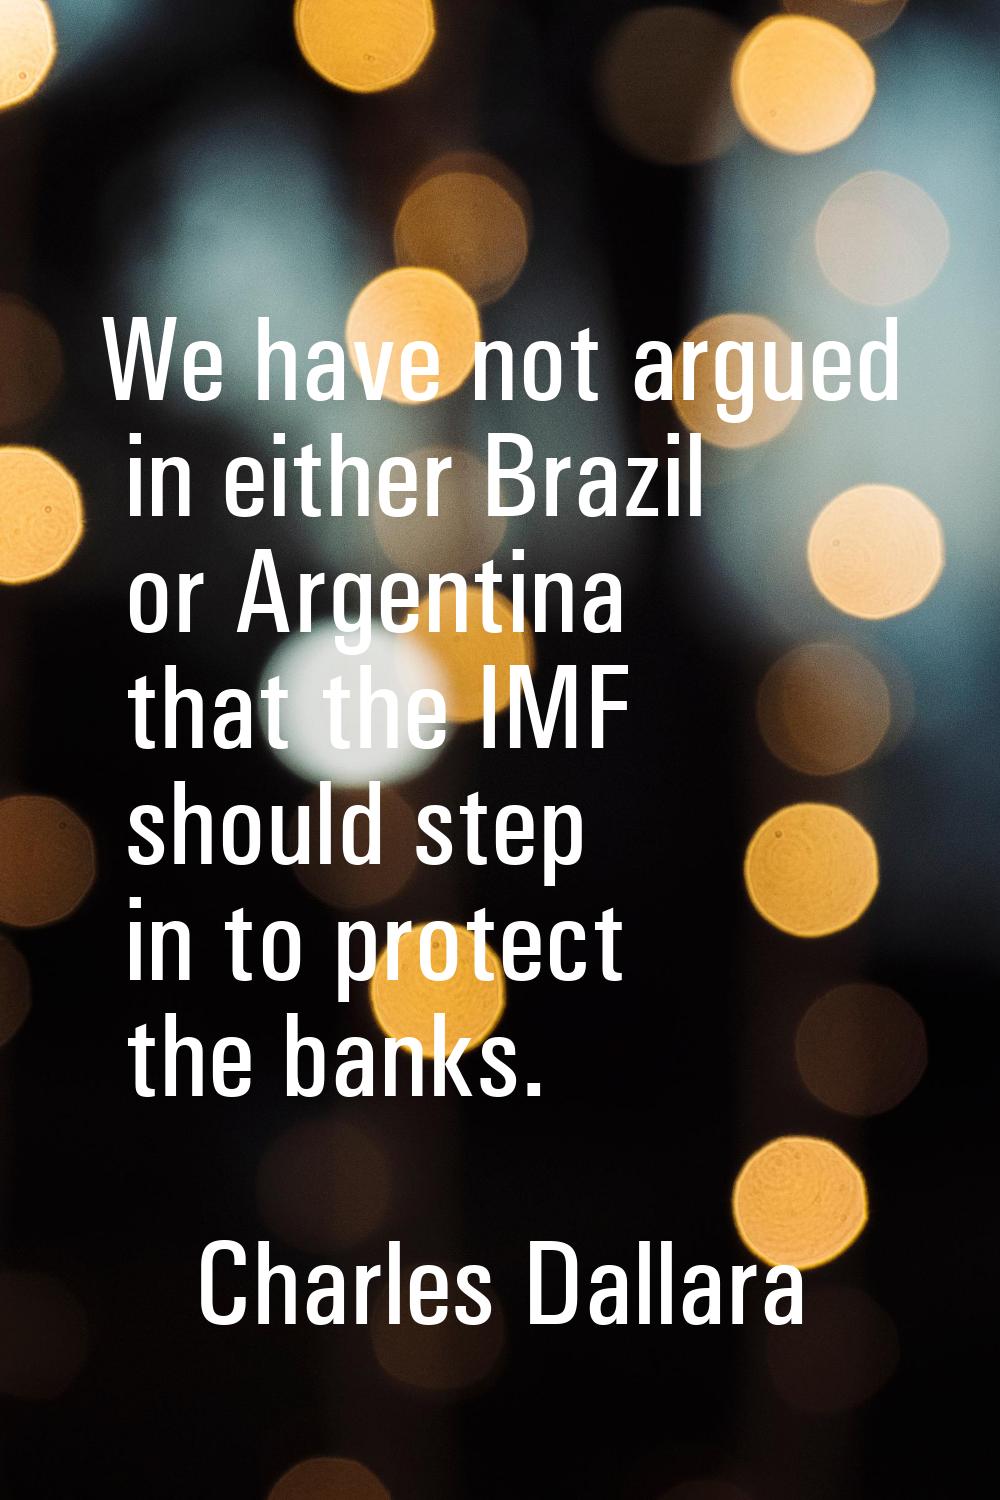 We have not argued in either Brazil or Argentina that the IMF should step in to protect the banks.